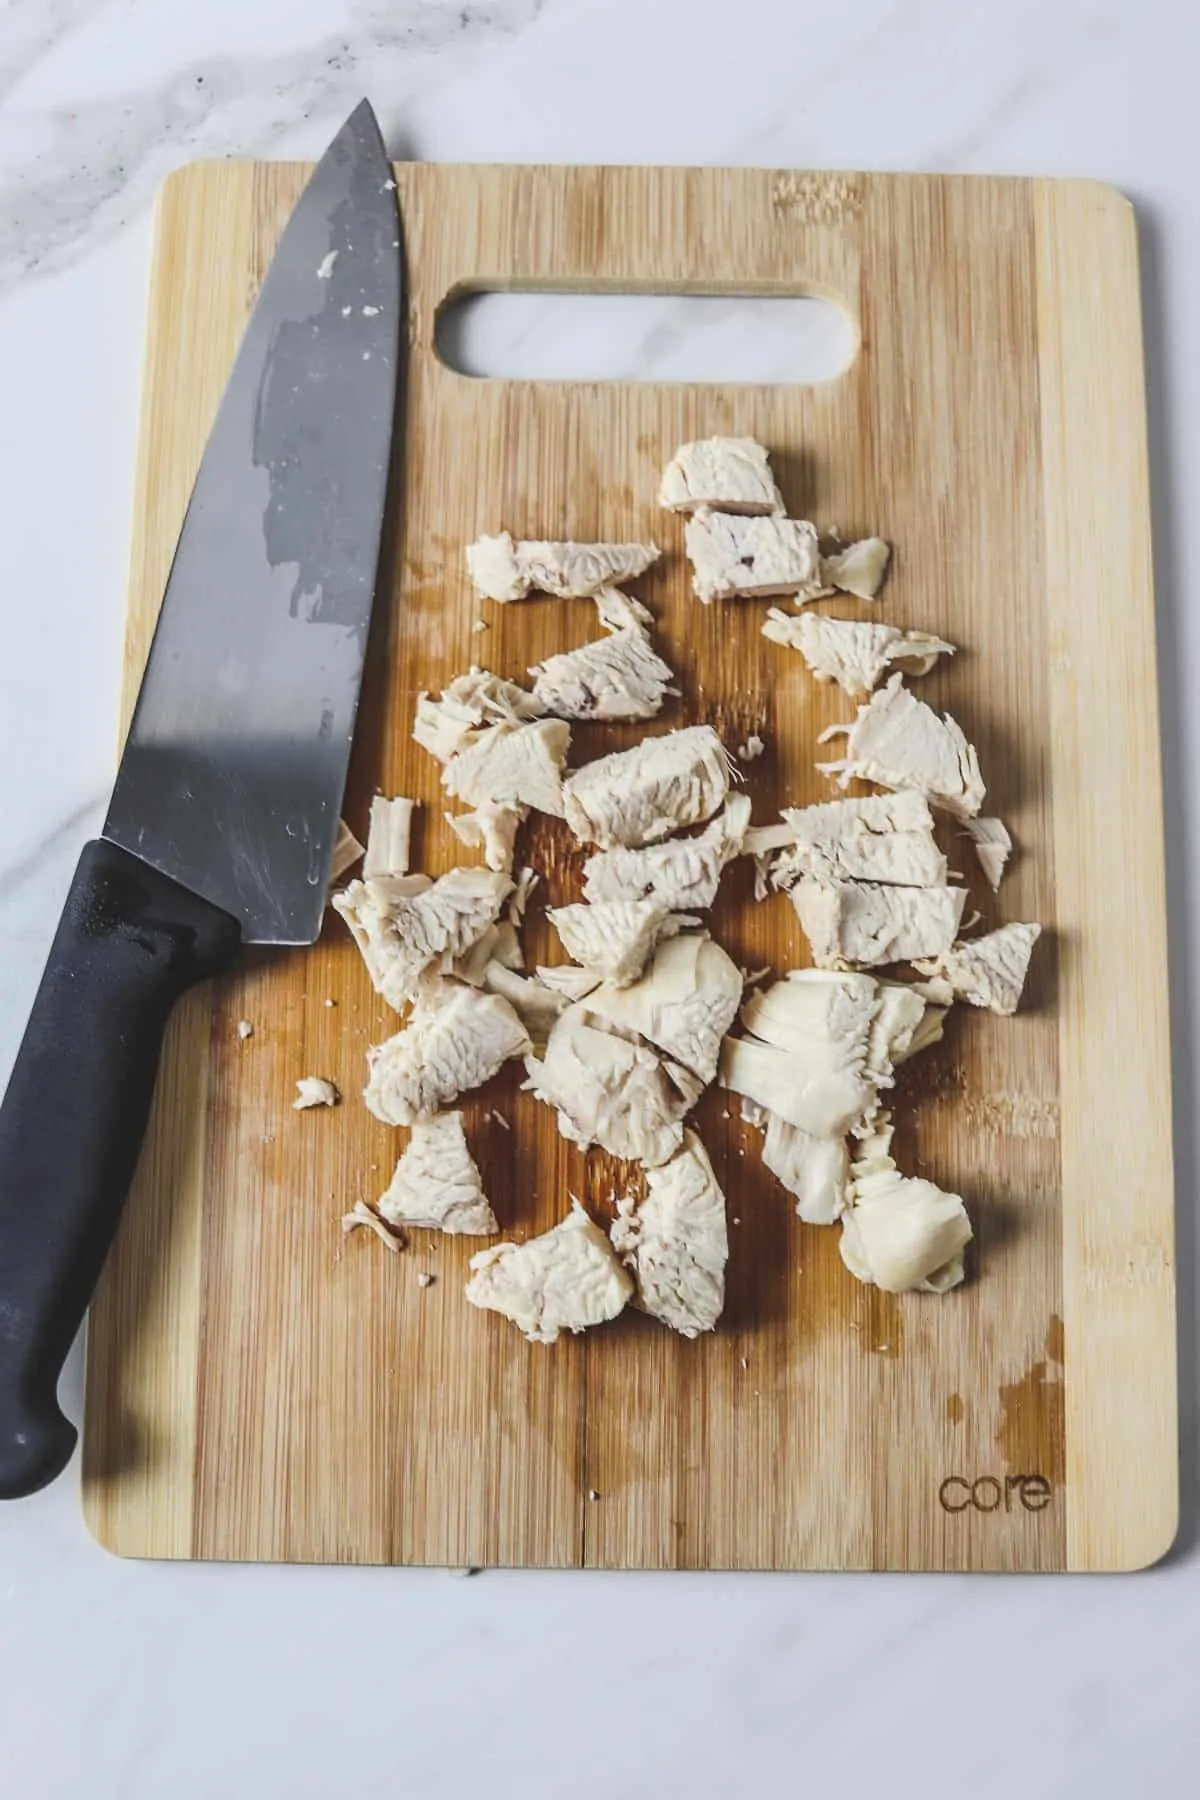 diced chicken breast on a wood cutting board with chef knife